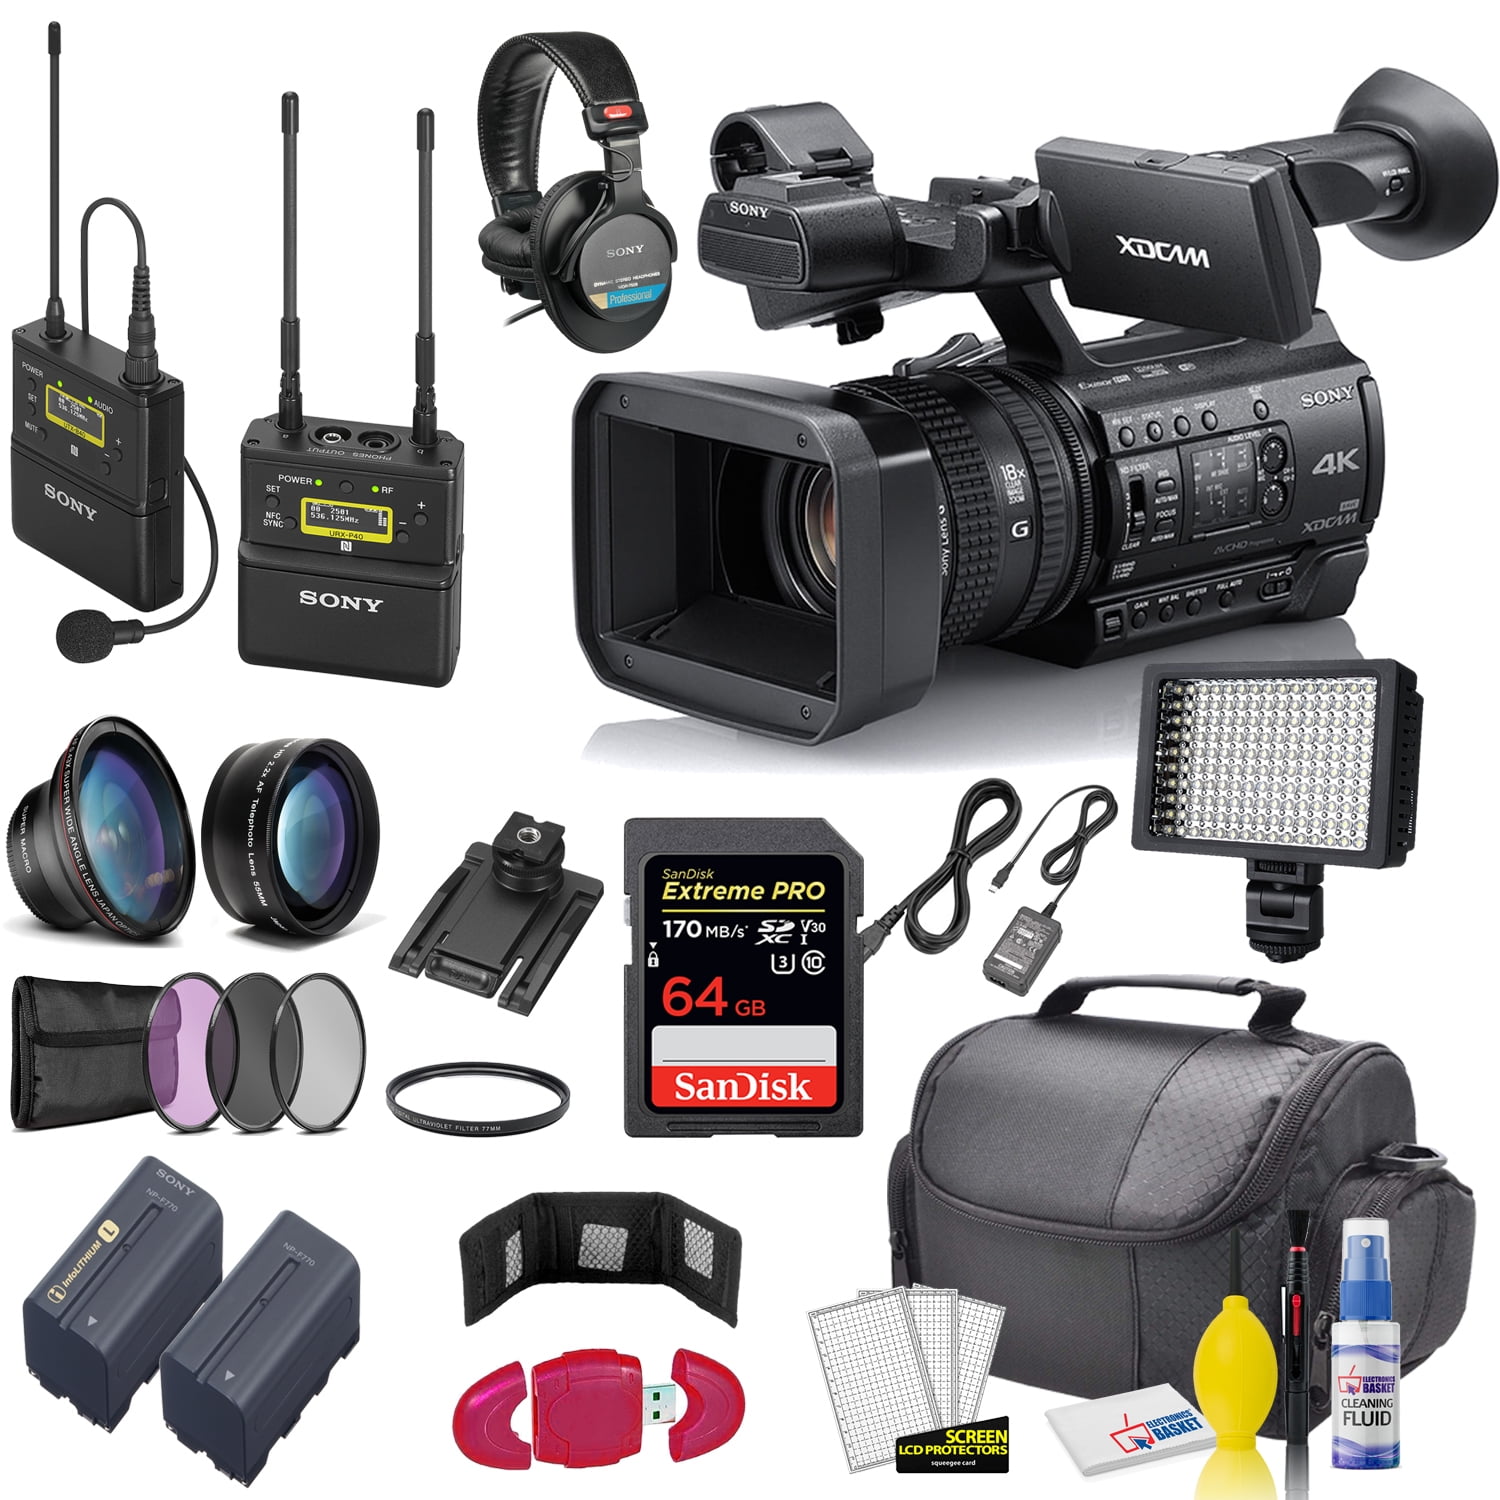 PXW-Z150 4K XDCAM Camcorder (PXW-Z150) With Sony Mic, Sandisk 64GB Extreme Card, Extra Battery, UV Filter, LED Light, Case, Telephoto Lens, and More . Advanced Bundle - Walmart.com